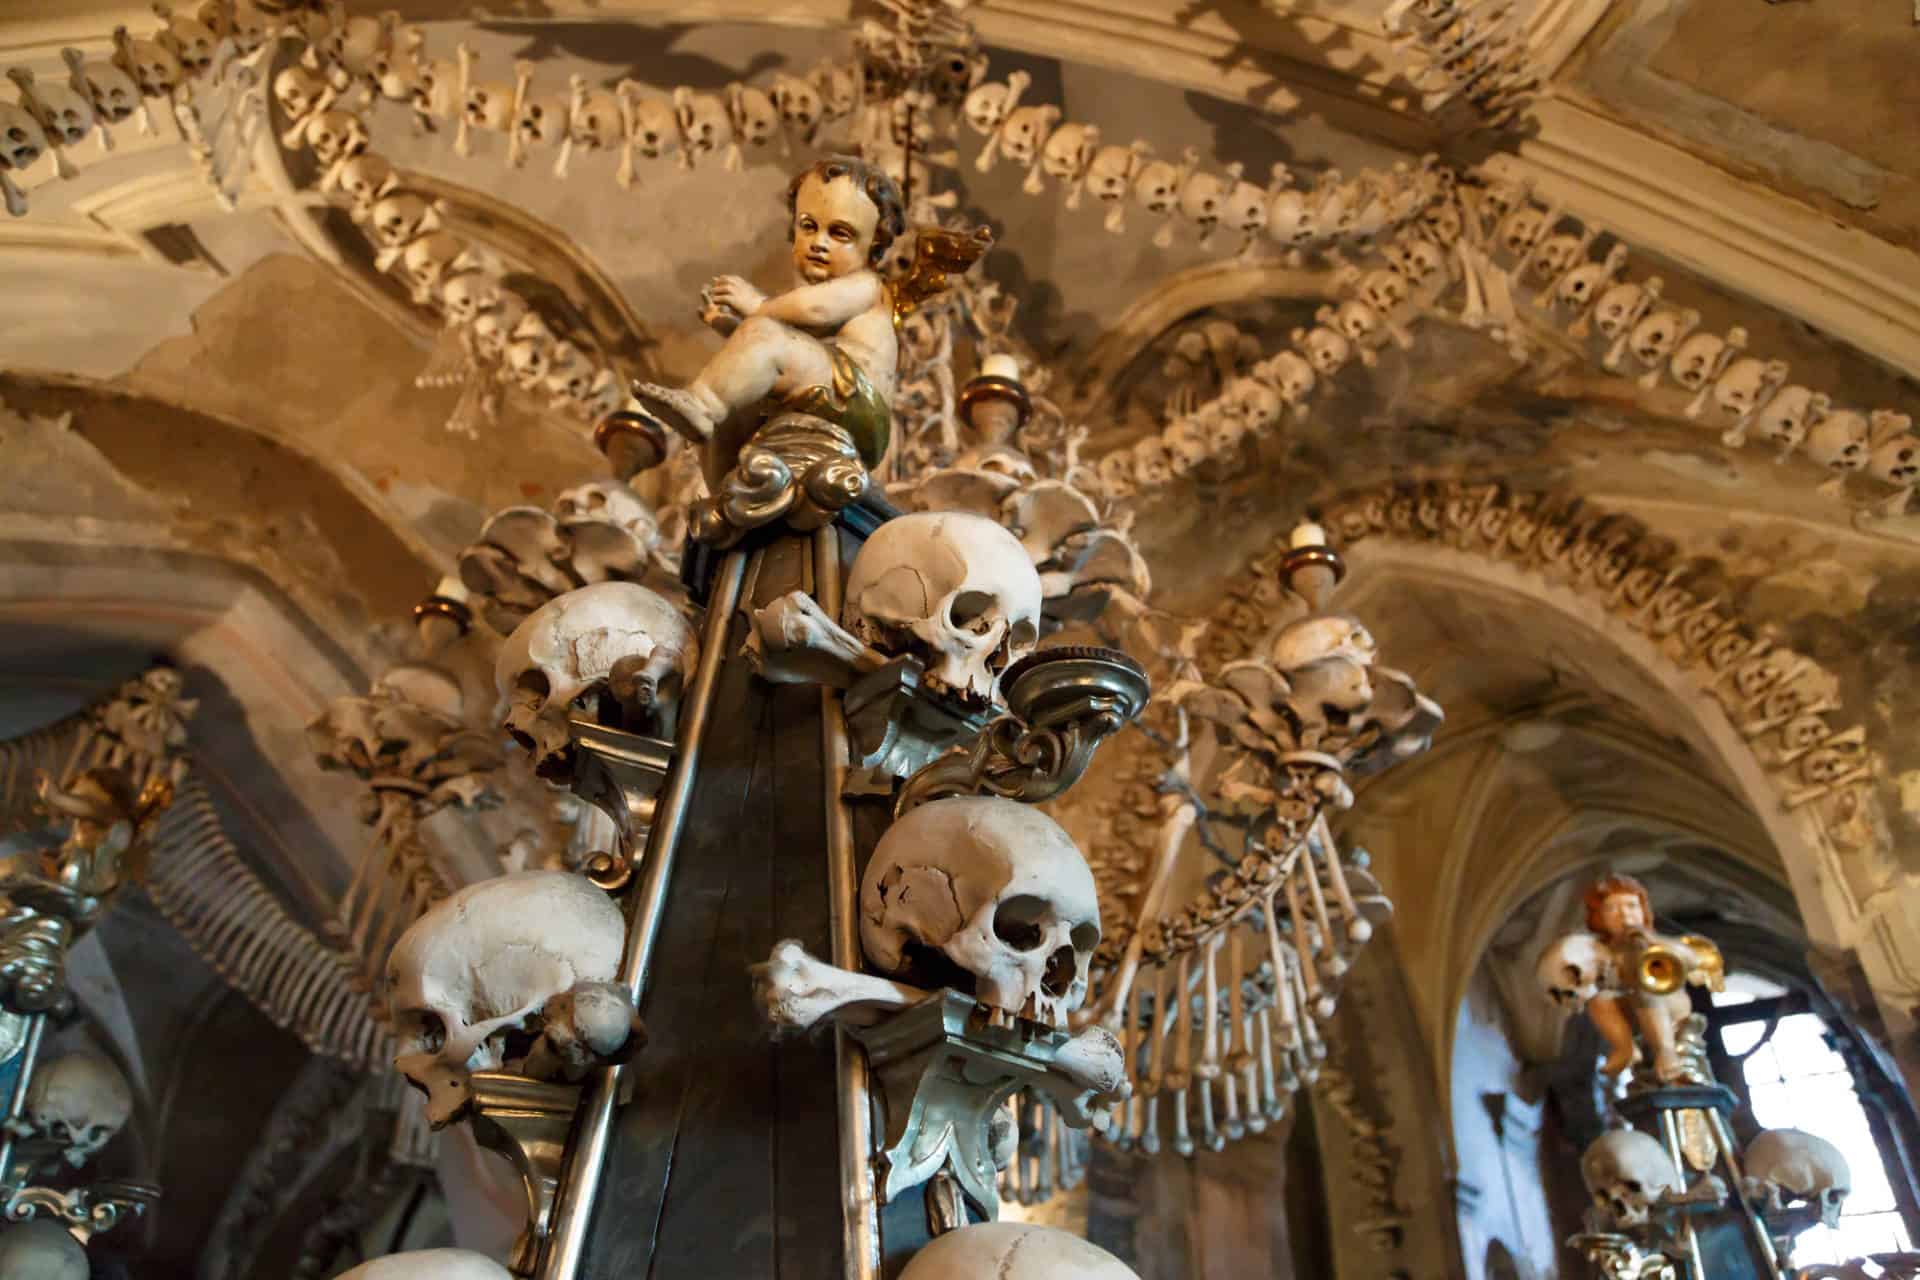 What are the Top 10, most bizarre, and off-the-wall attractions across Europe?